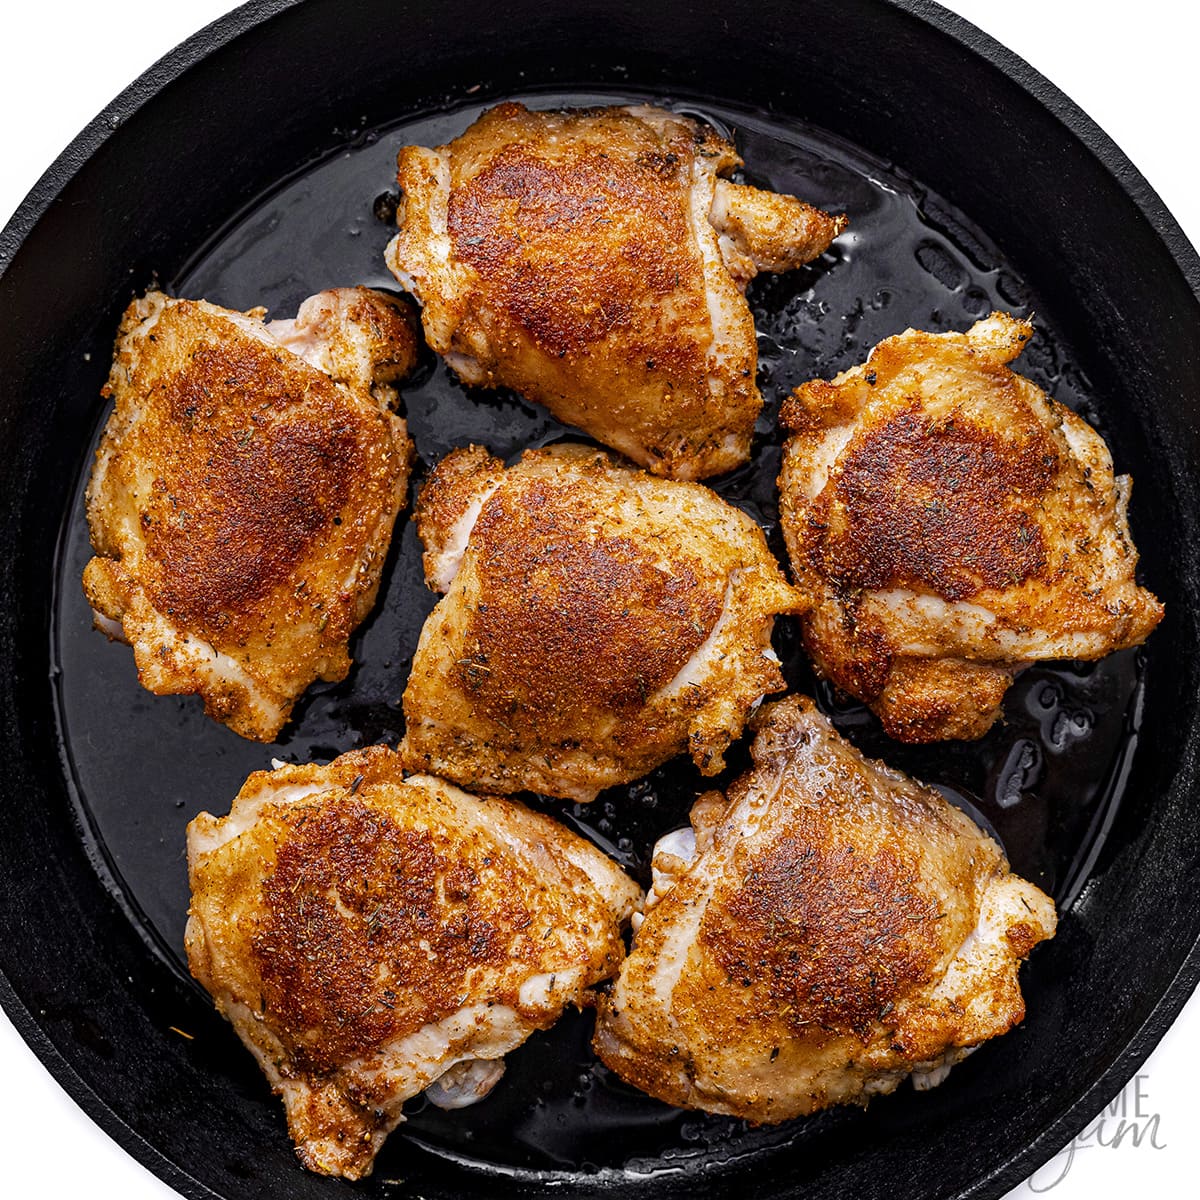 Chicken is seared in a cast iron skillet.